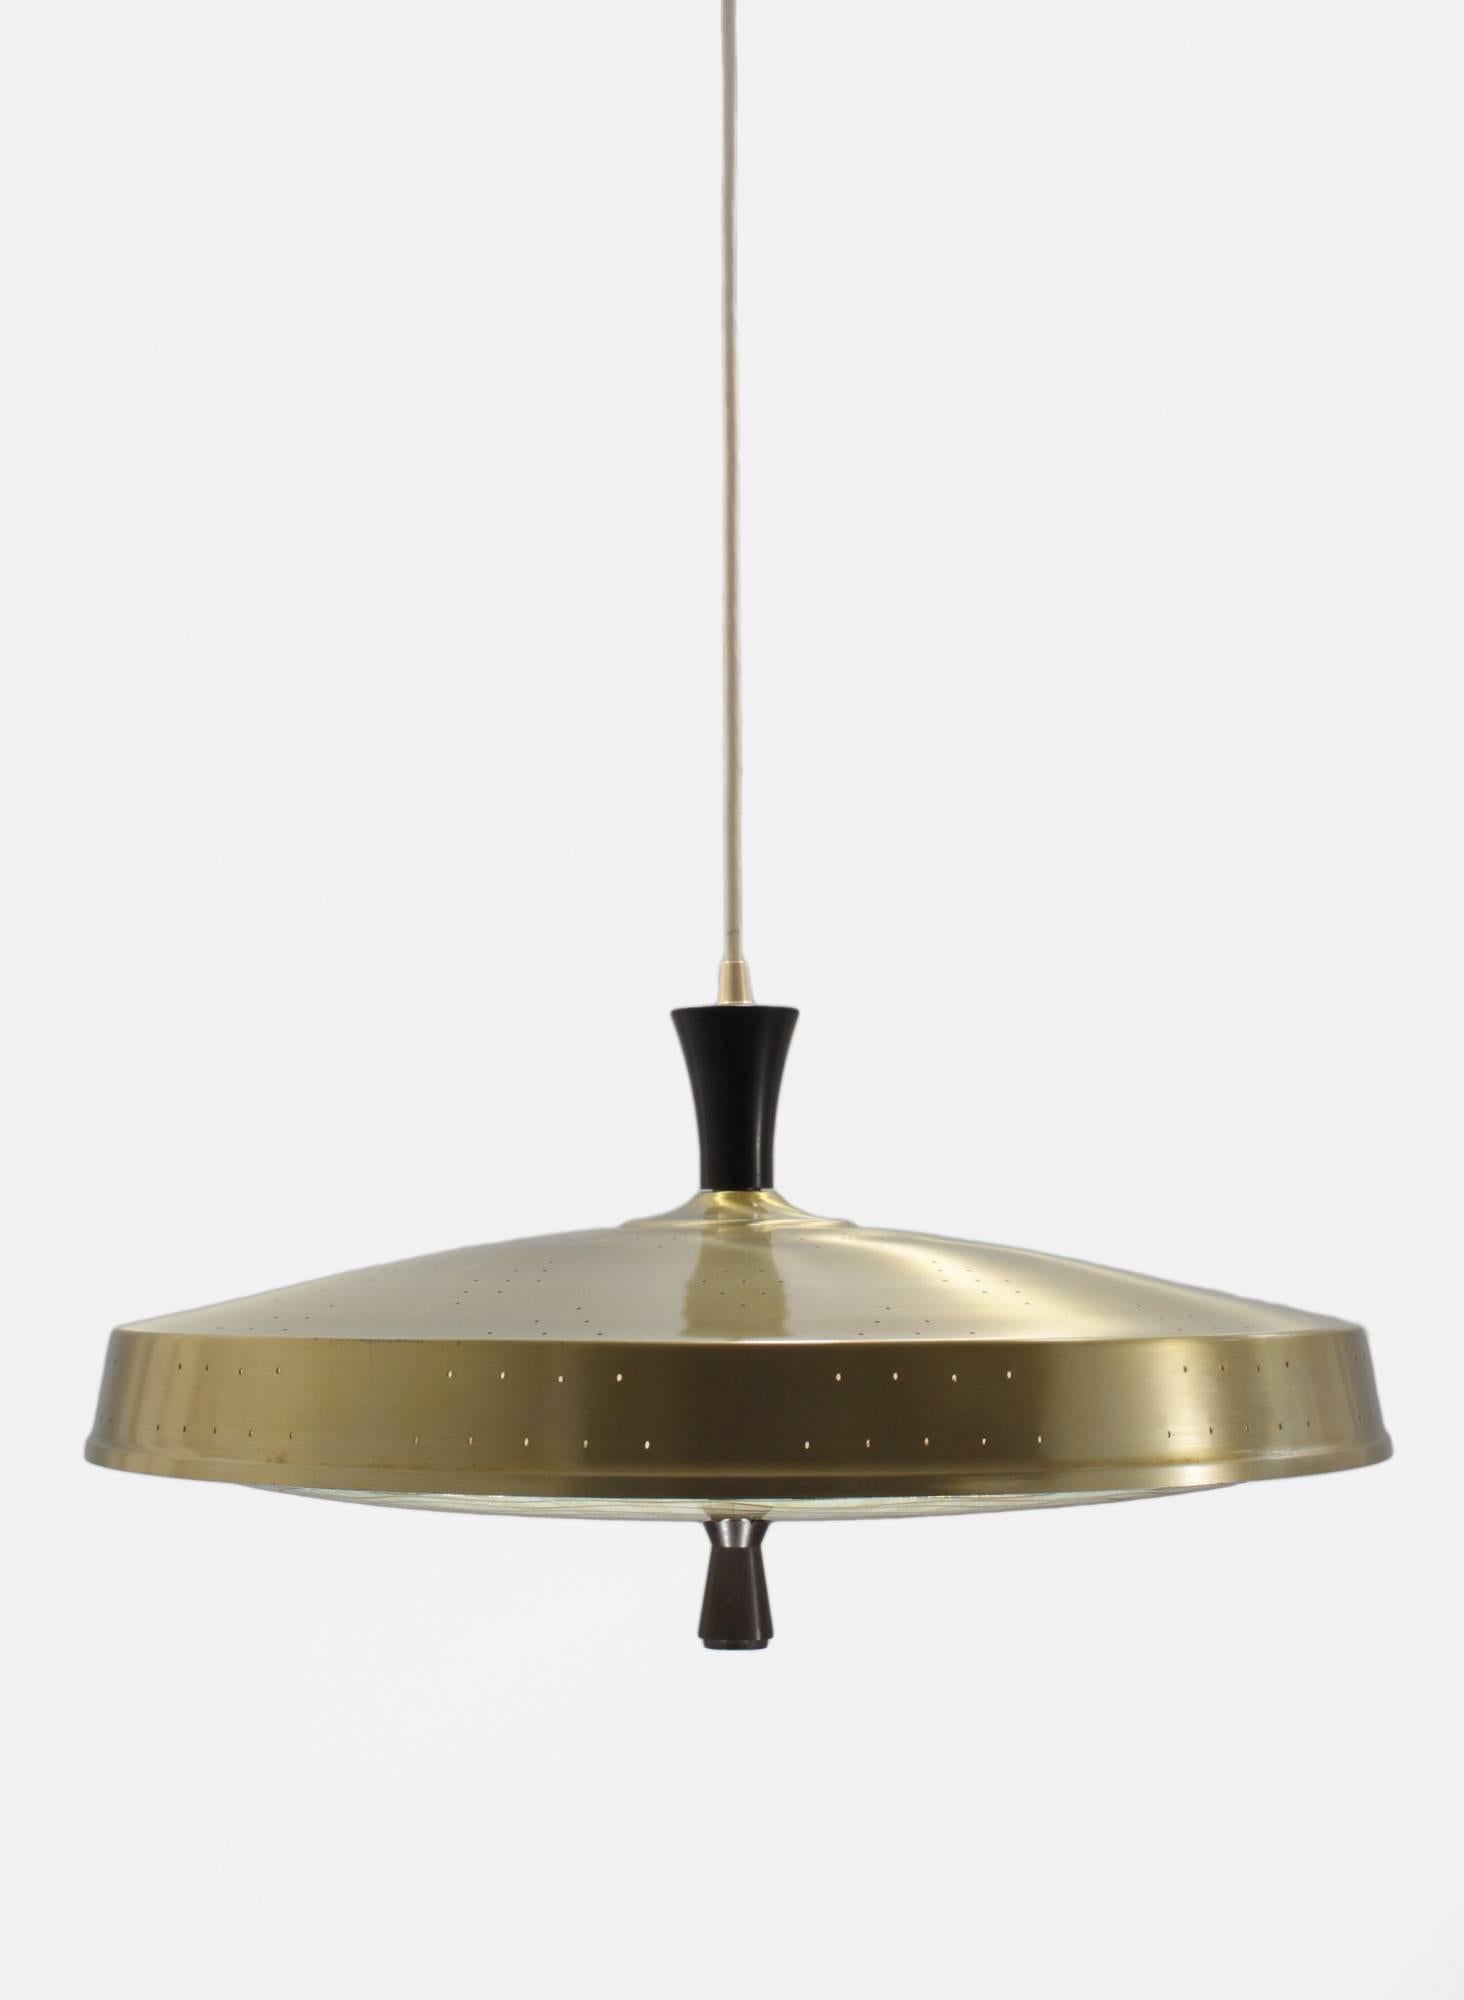 A 1950s pendant in the style of Gerald Thurston featuring a dazzling Murano glass diffuser detailed in 14-karat gold paint. The fixture has a classic Space Age 